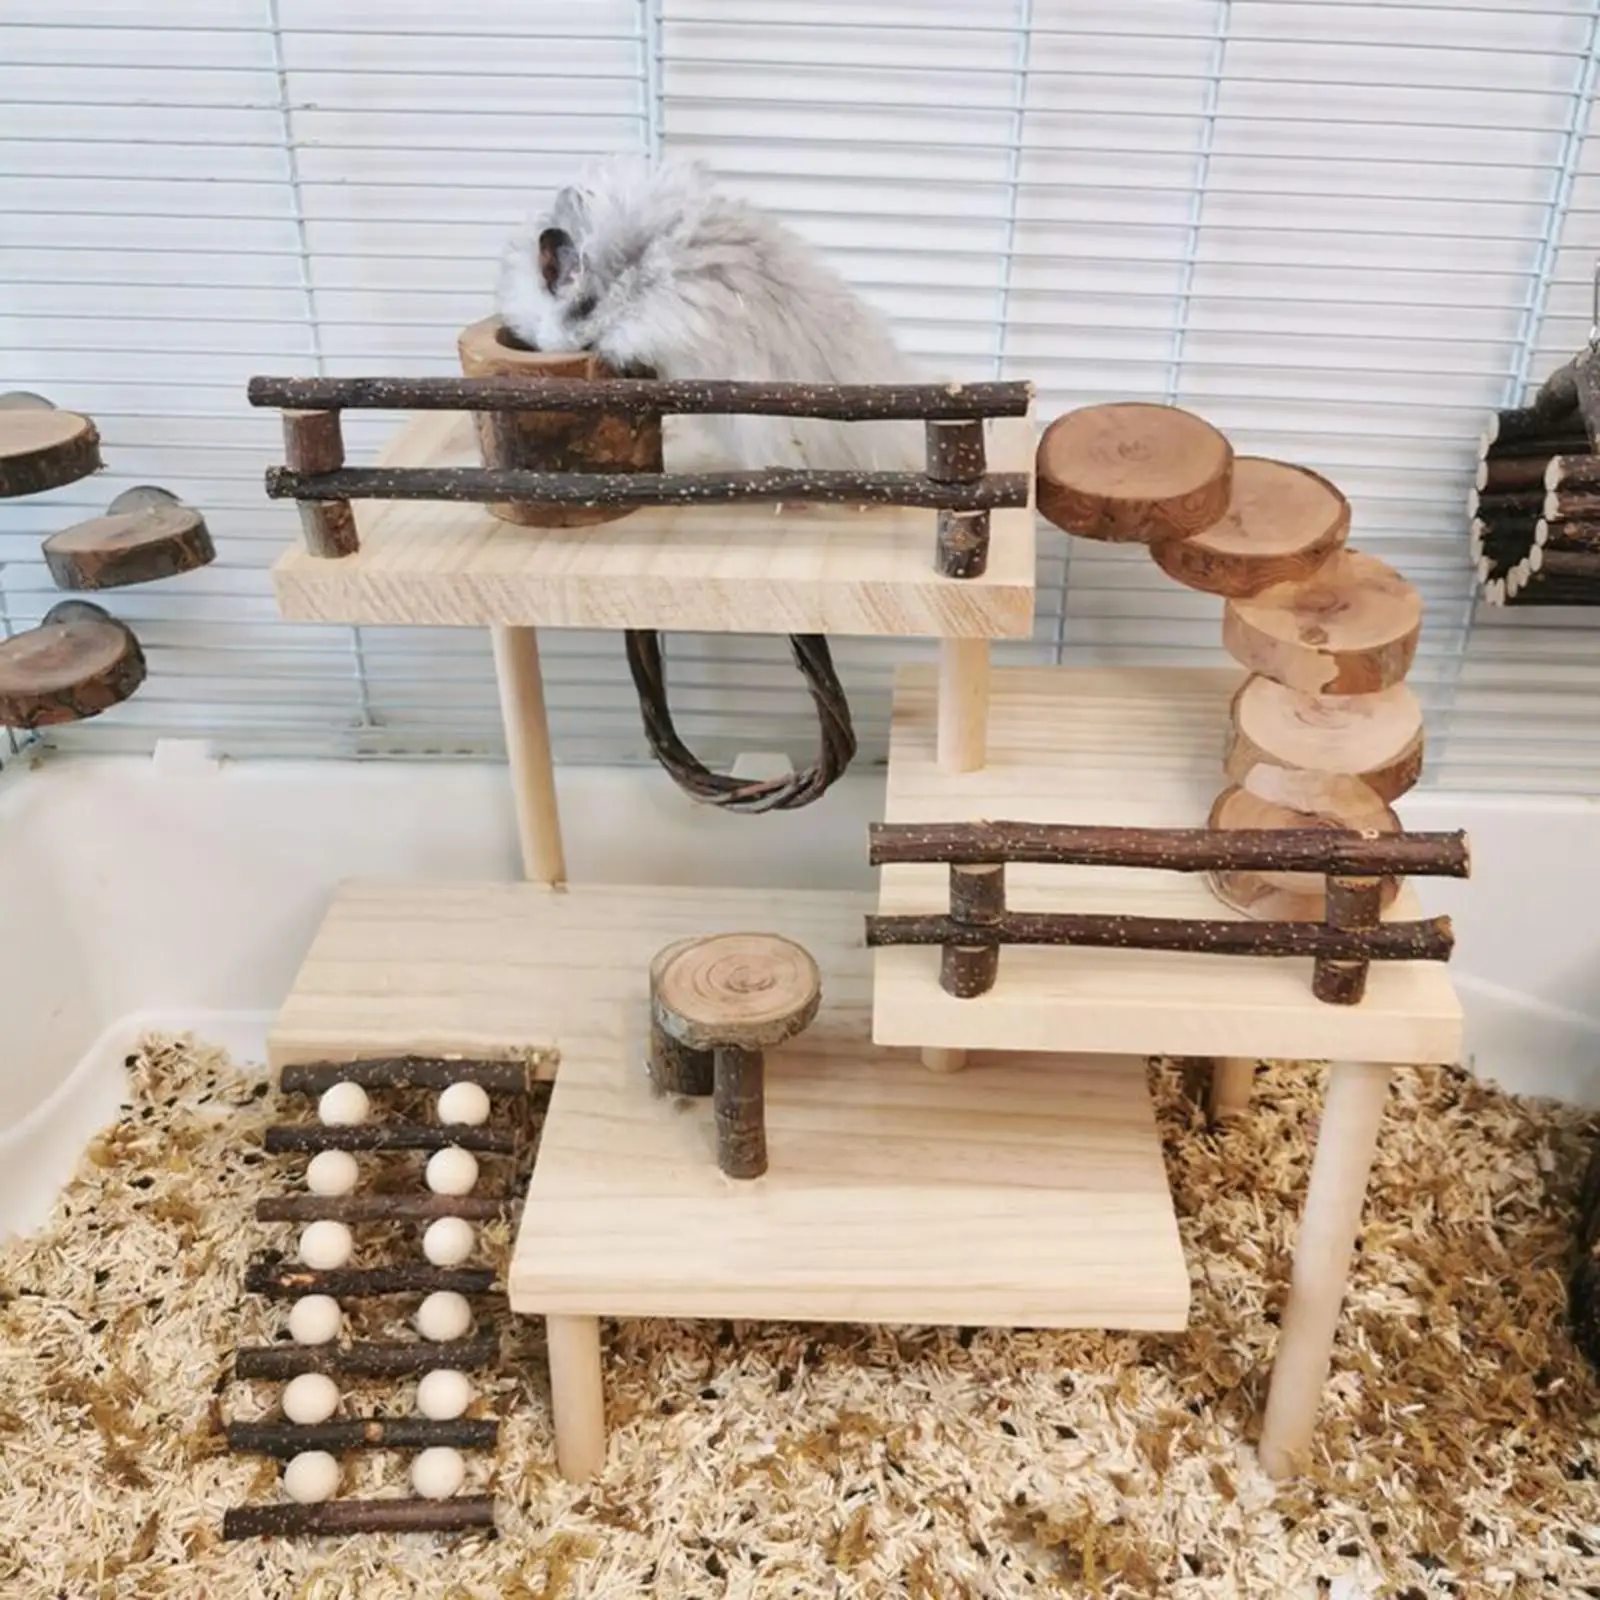 Hamster Toy Wooden Platform for Pets Activity Set Cage Accessories Exercise